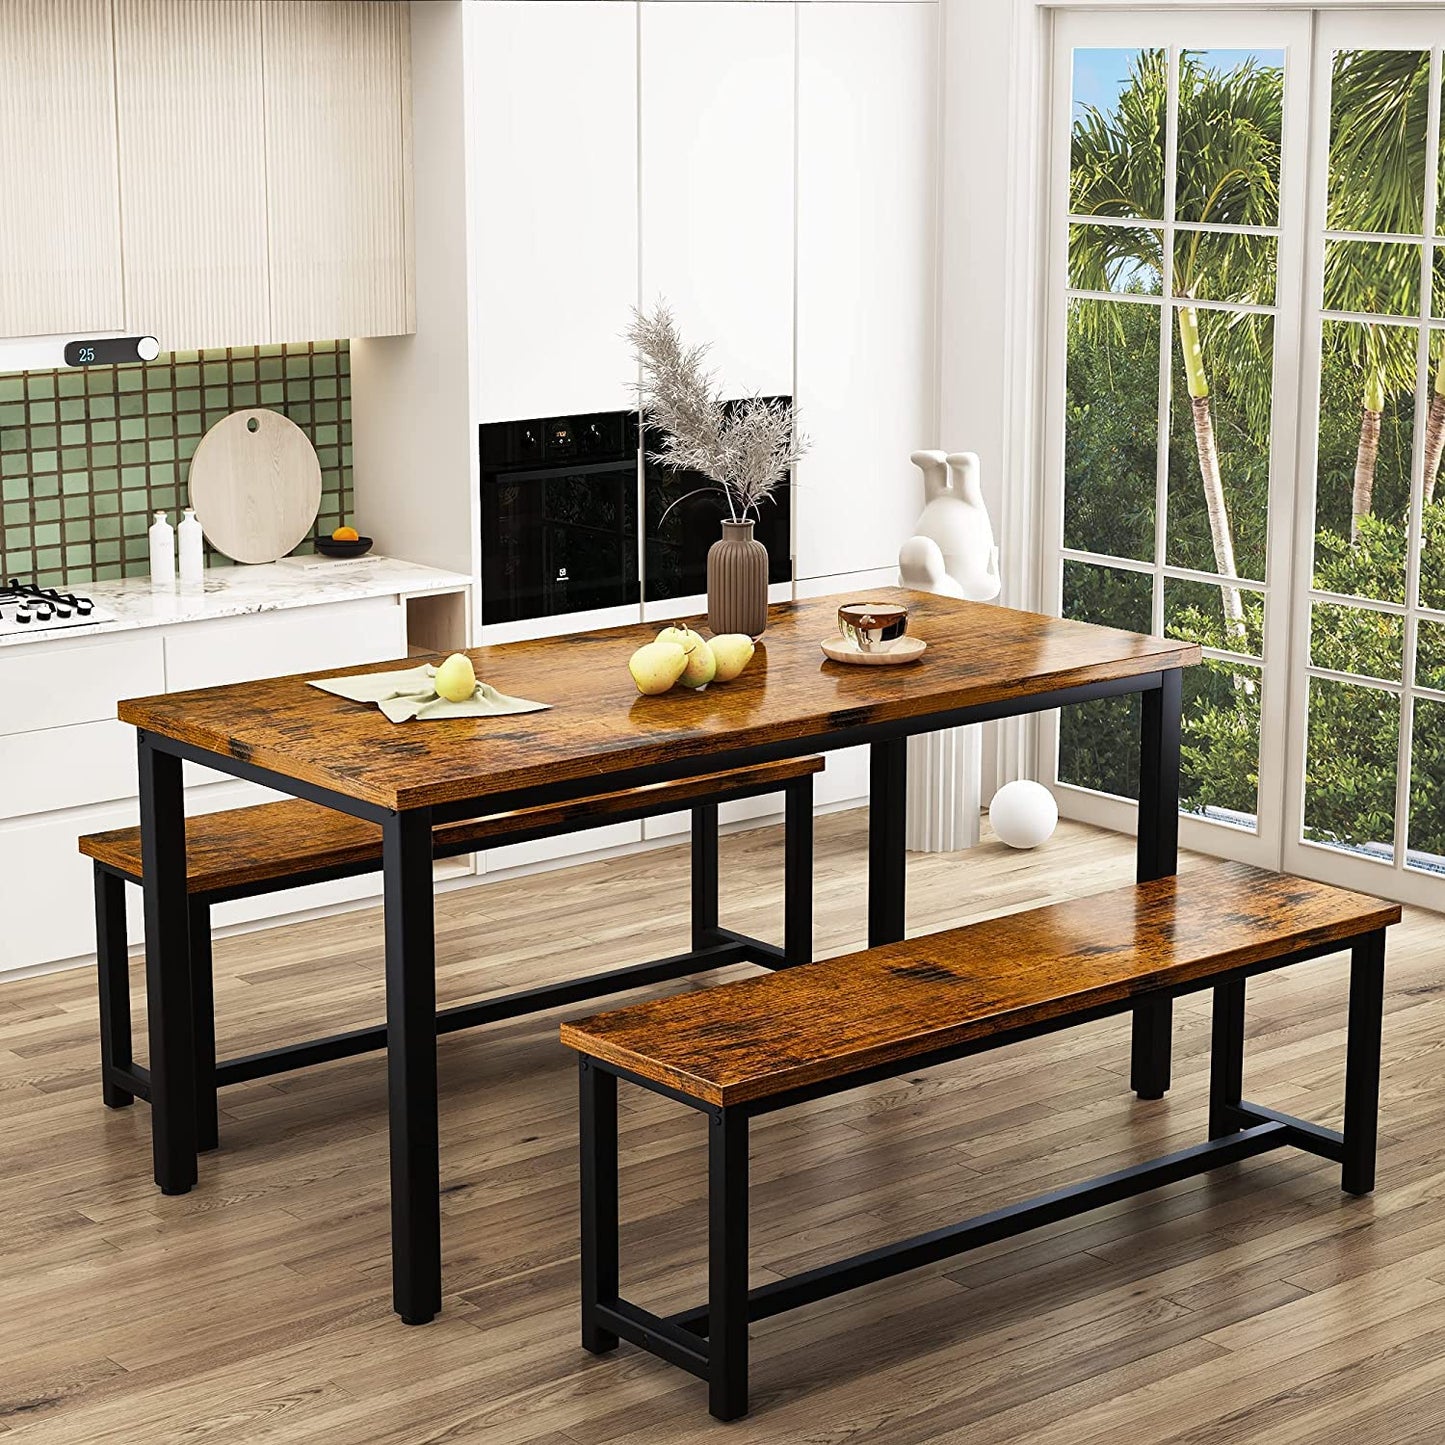 LinkRomat Dining Room Table Set with 2 Benches, Farmhouse Dining Table Set for 4-6, Wood Breakfast Table Set Dinner Table Set Kitchen Table and Chairs for Breakfast Nook Small Spaces, Brown